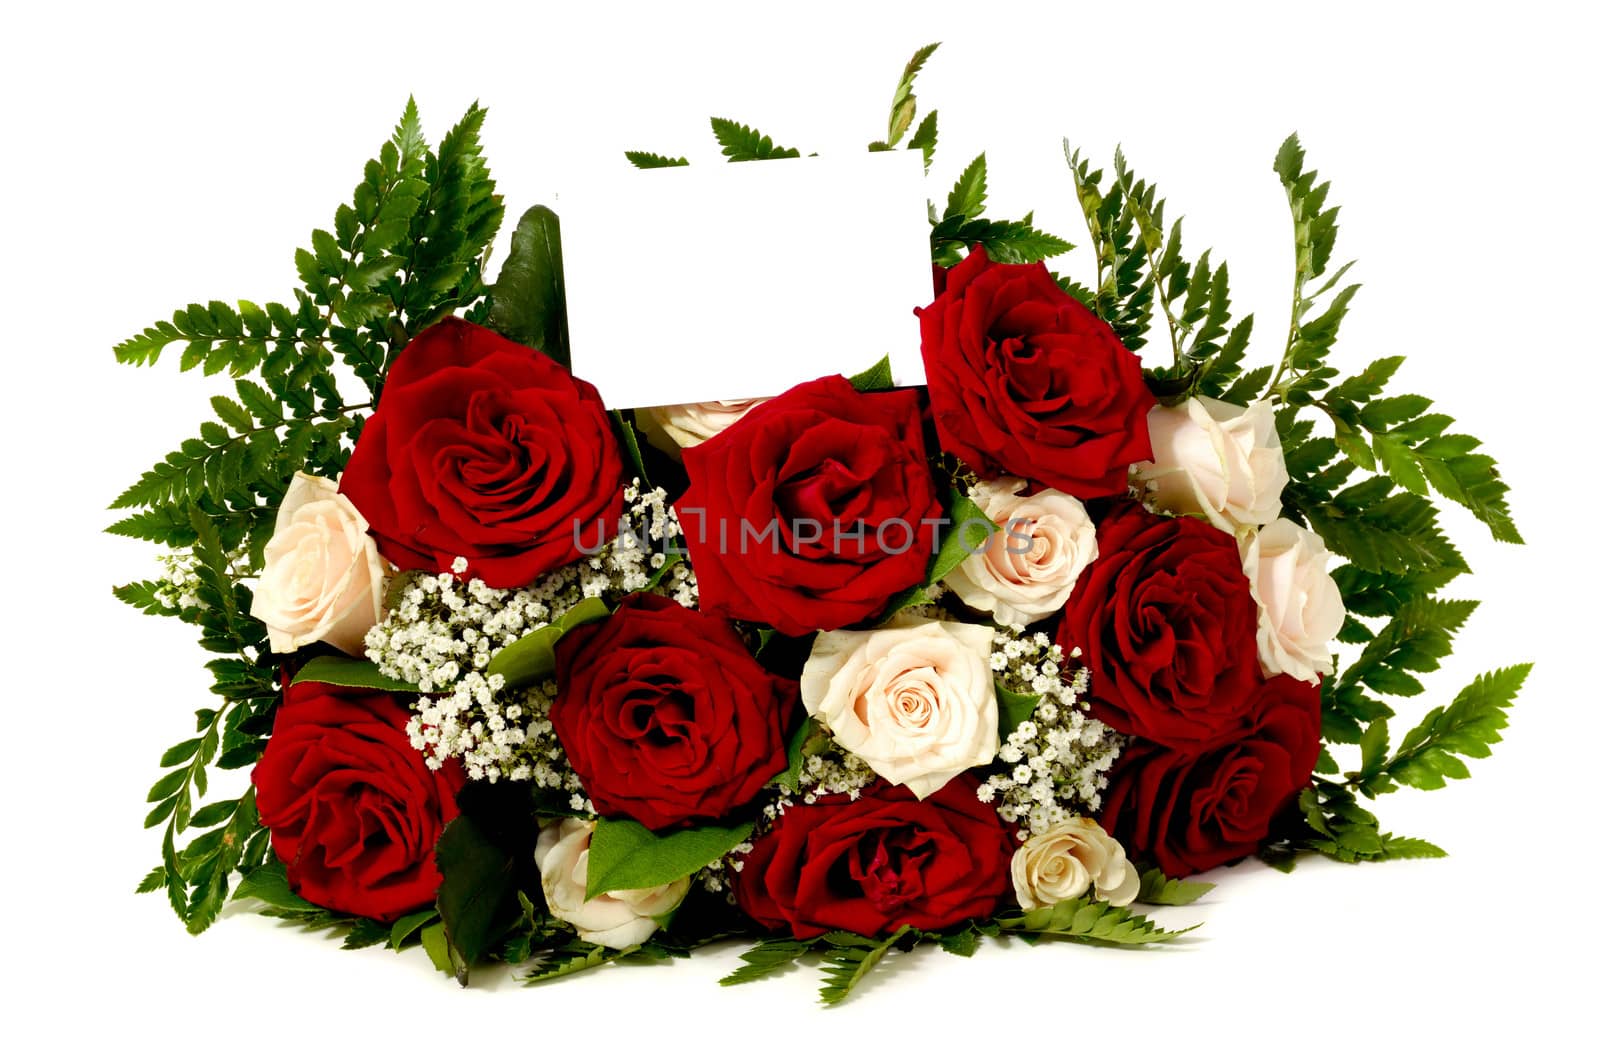 Bouquet of rose flowers with a blank gift card, isolated on white background. Write your own tekst.